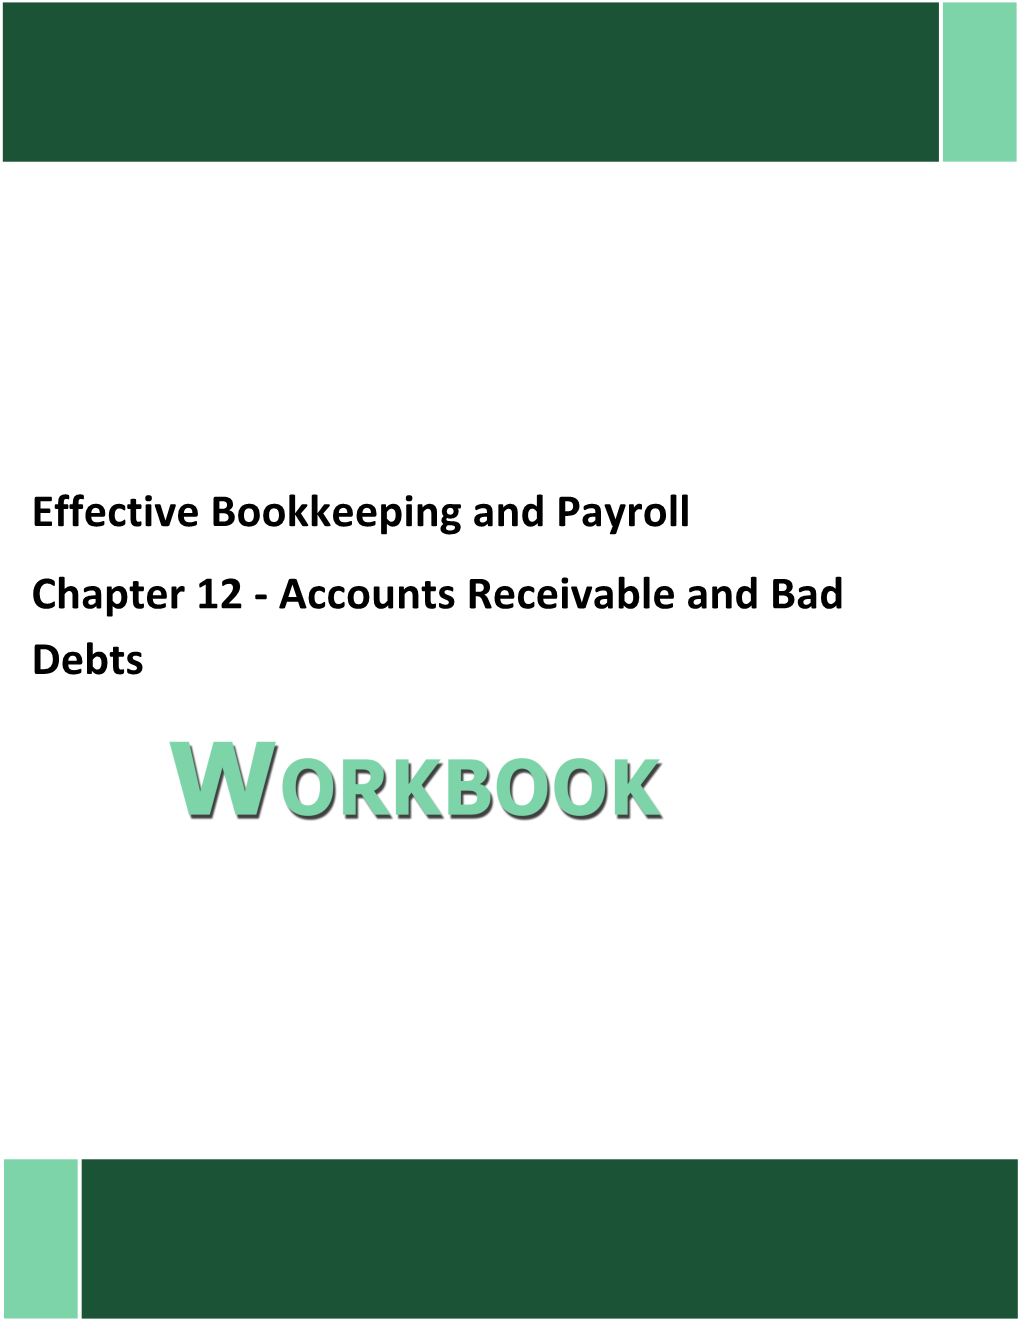 Effective Bookkeeping and Payroll Chapter 12 - Accounts Receivable and Bad Debts Slide 1